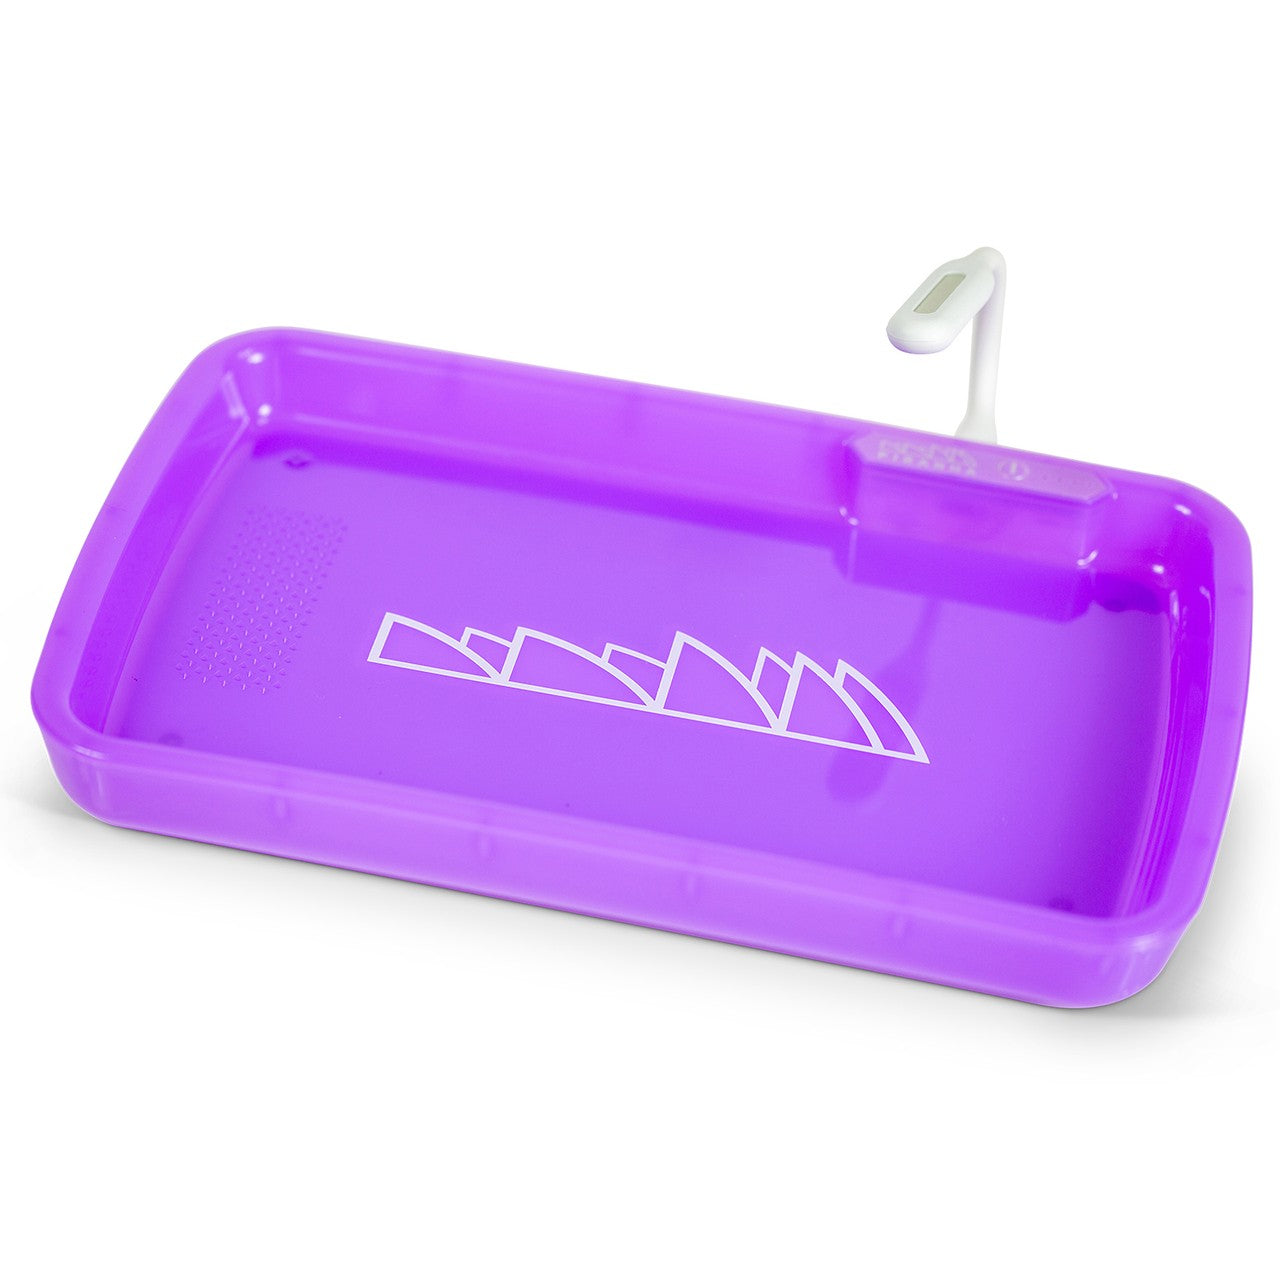 Piranha's new LED rolling trays will brighten up any smoke session. It features a designated spot for a grinder and comes with a bending mini light for easy rolling and her inspection.